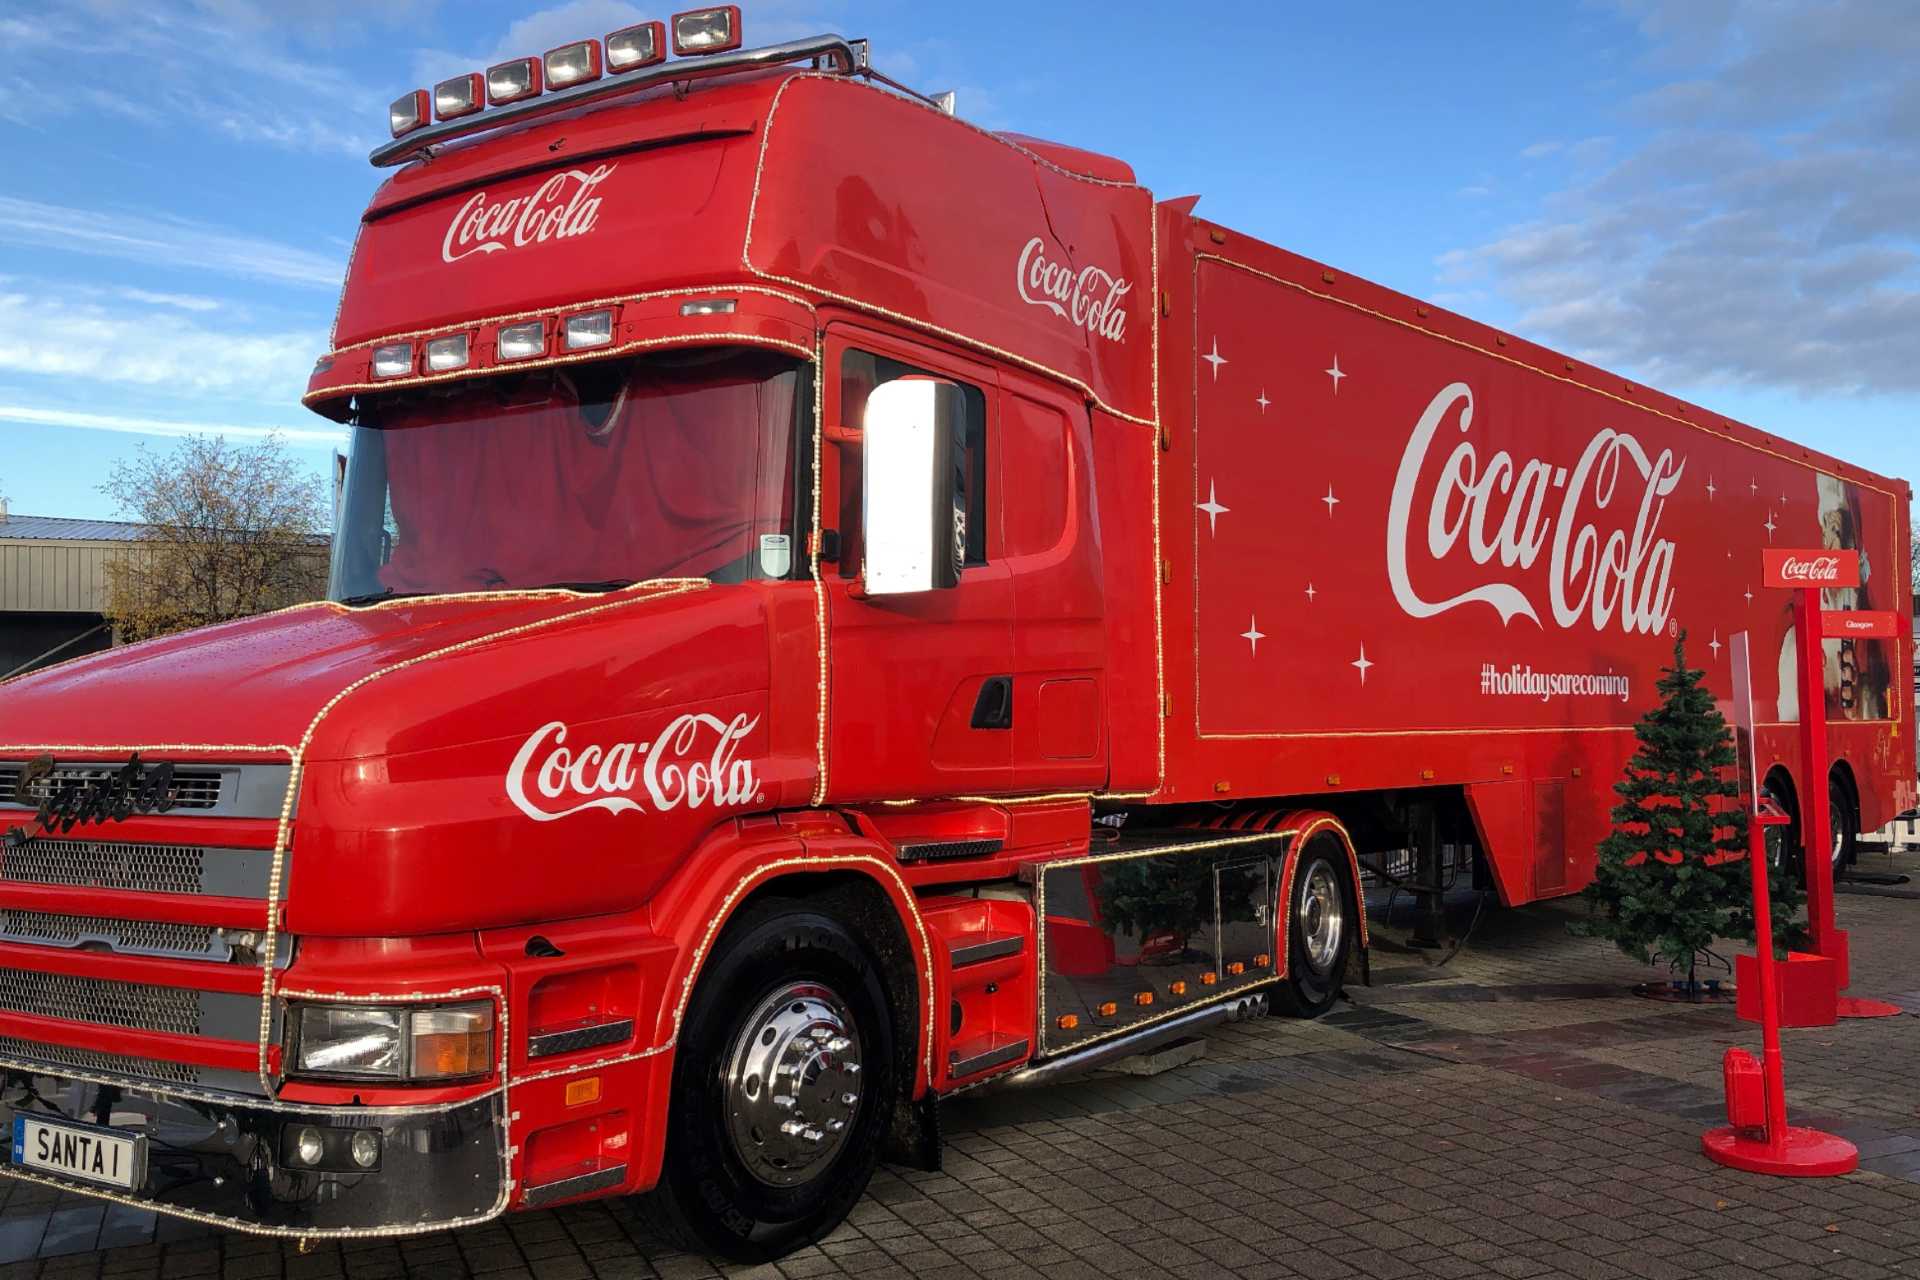 The Coca-Cola Christmas truck is coming to Silverburn | Silverburn Shopping Centre